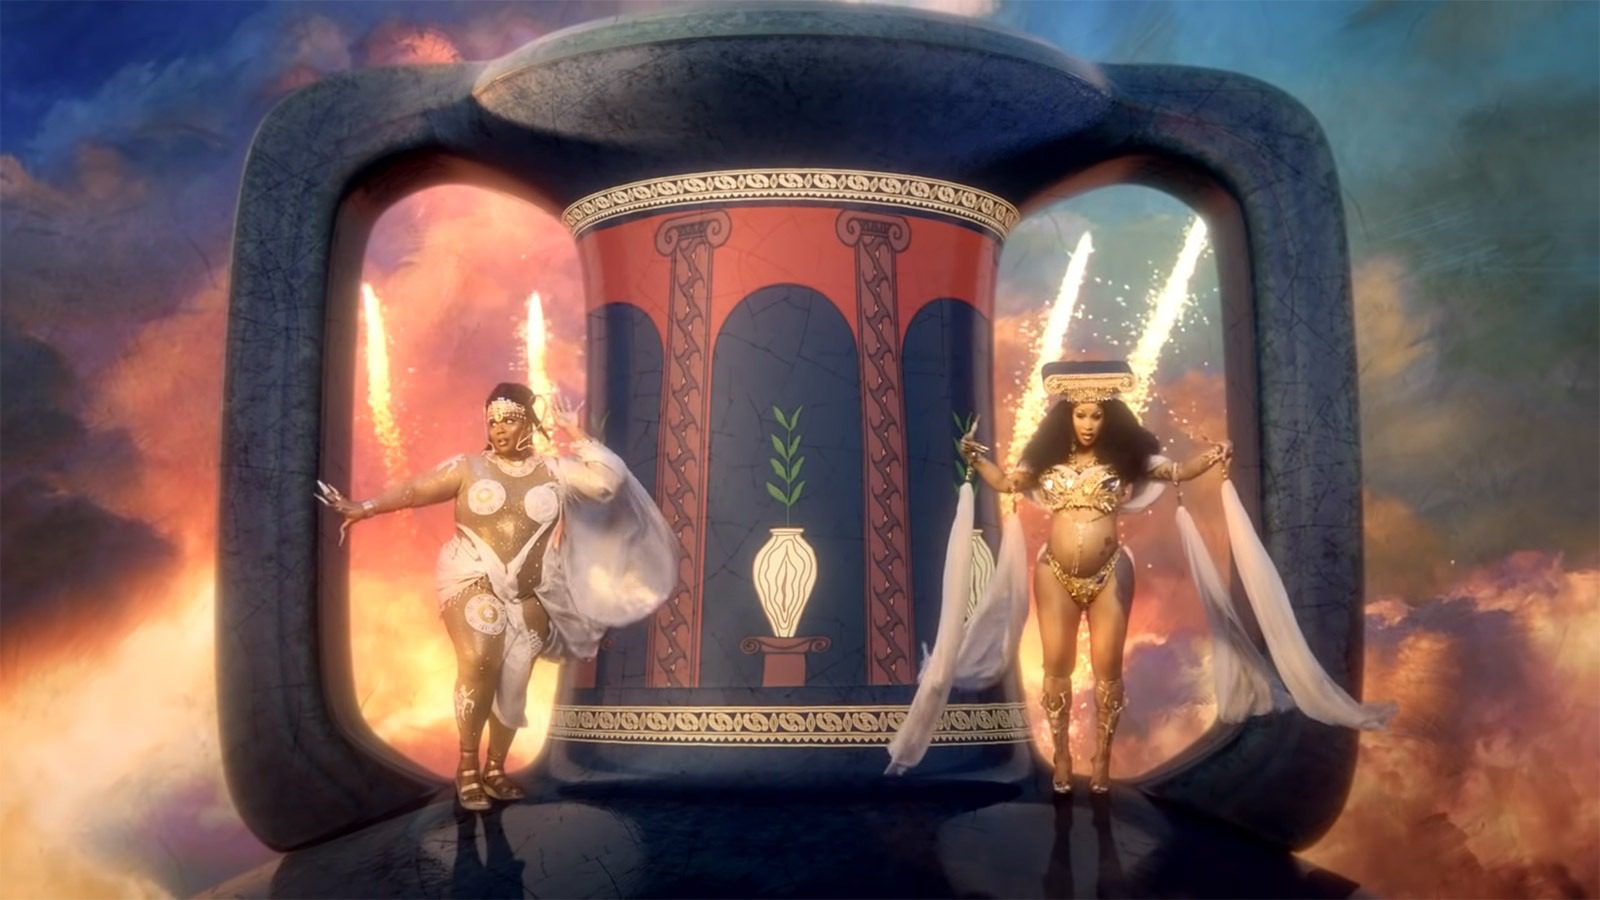 In “Rumors,” Lizzo & Cardi B pull from the ancient Greeks, putting a new twist on an old tradition